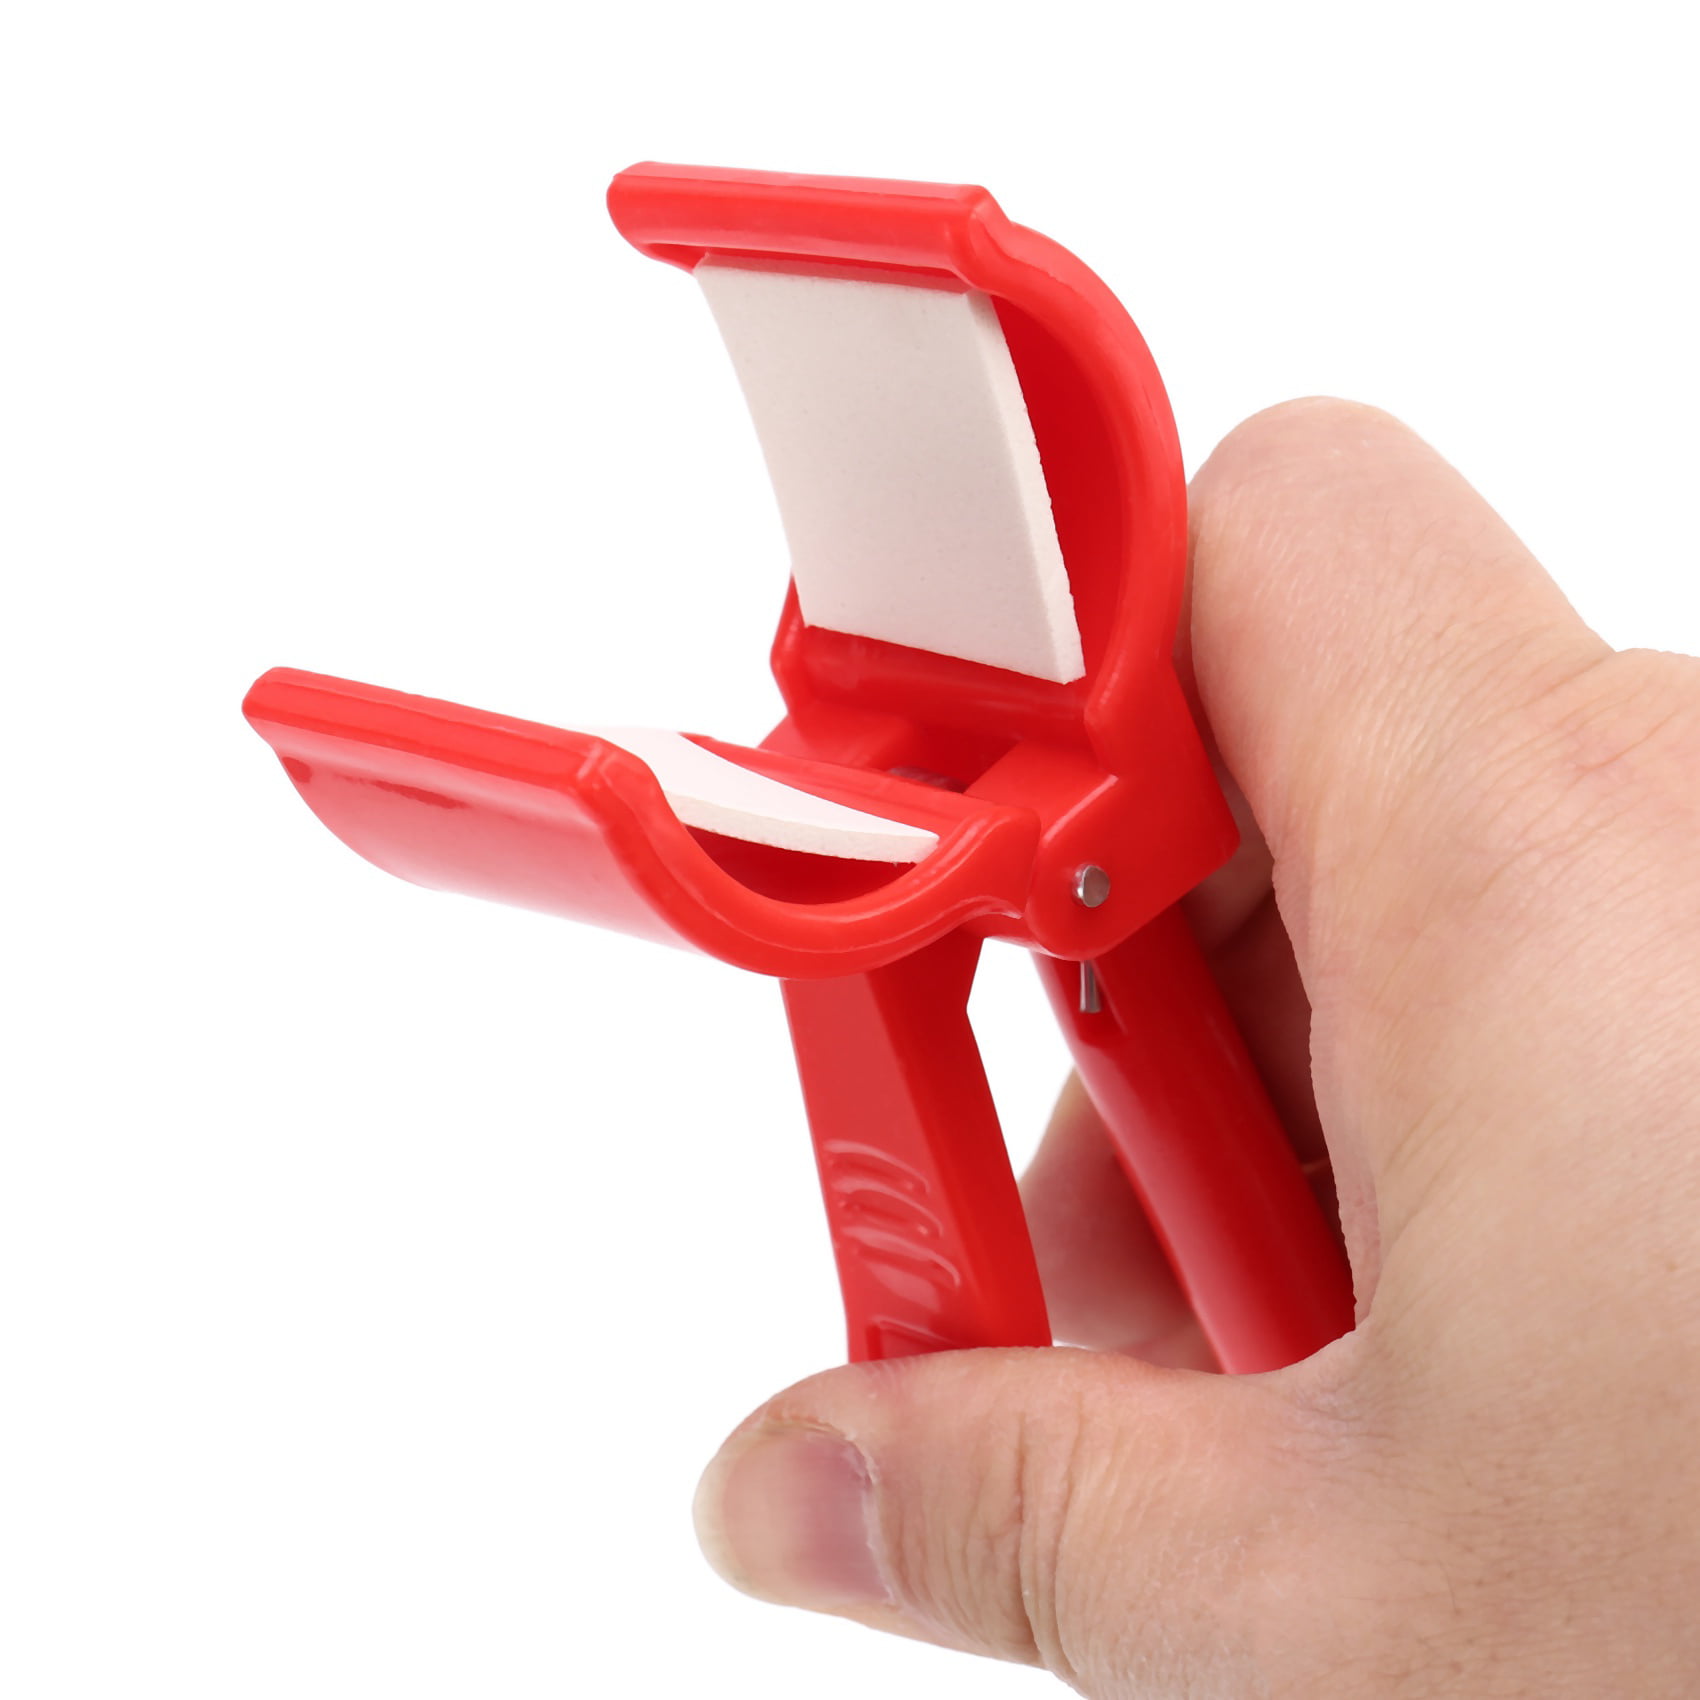 Merchandise Retail Sign Card Tag Pop Display Holder Clip Clamp Red K5r4 R8 for sale online 